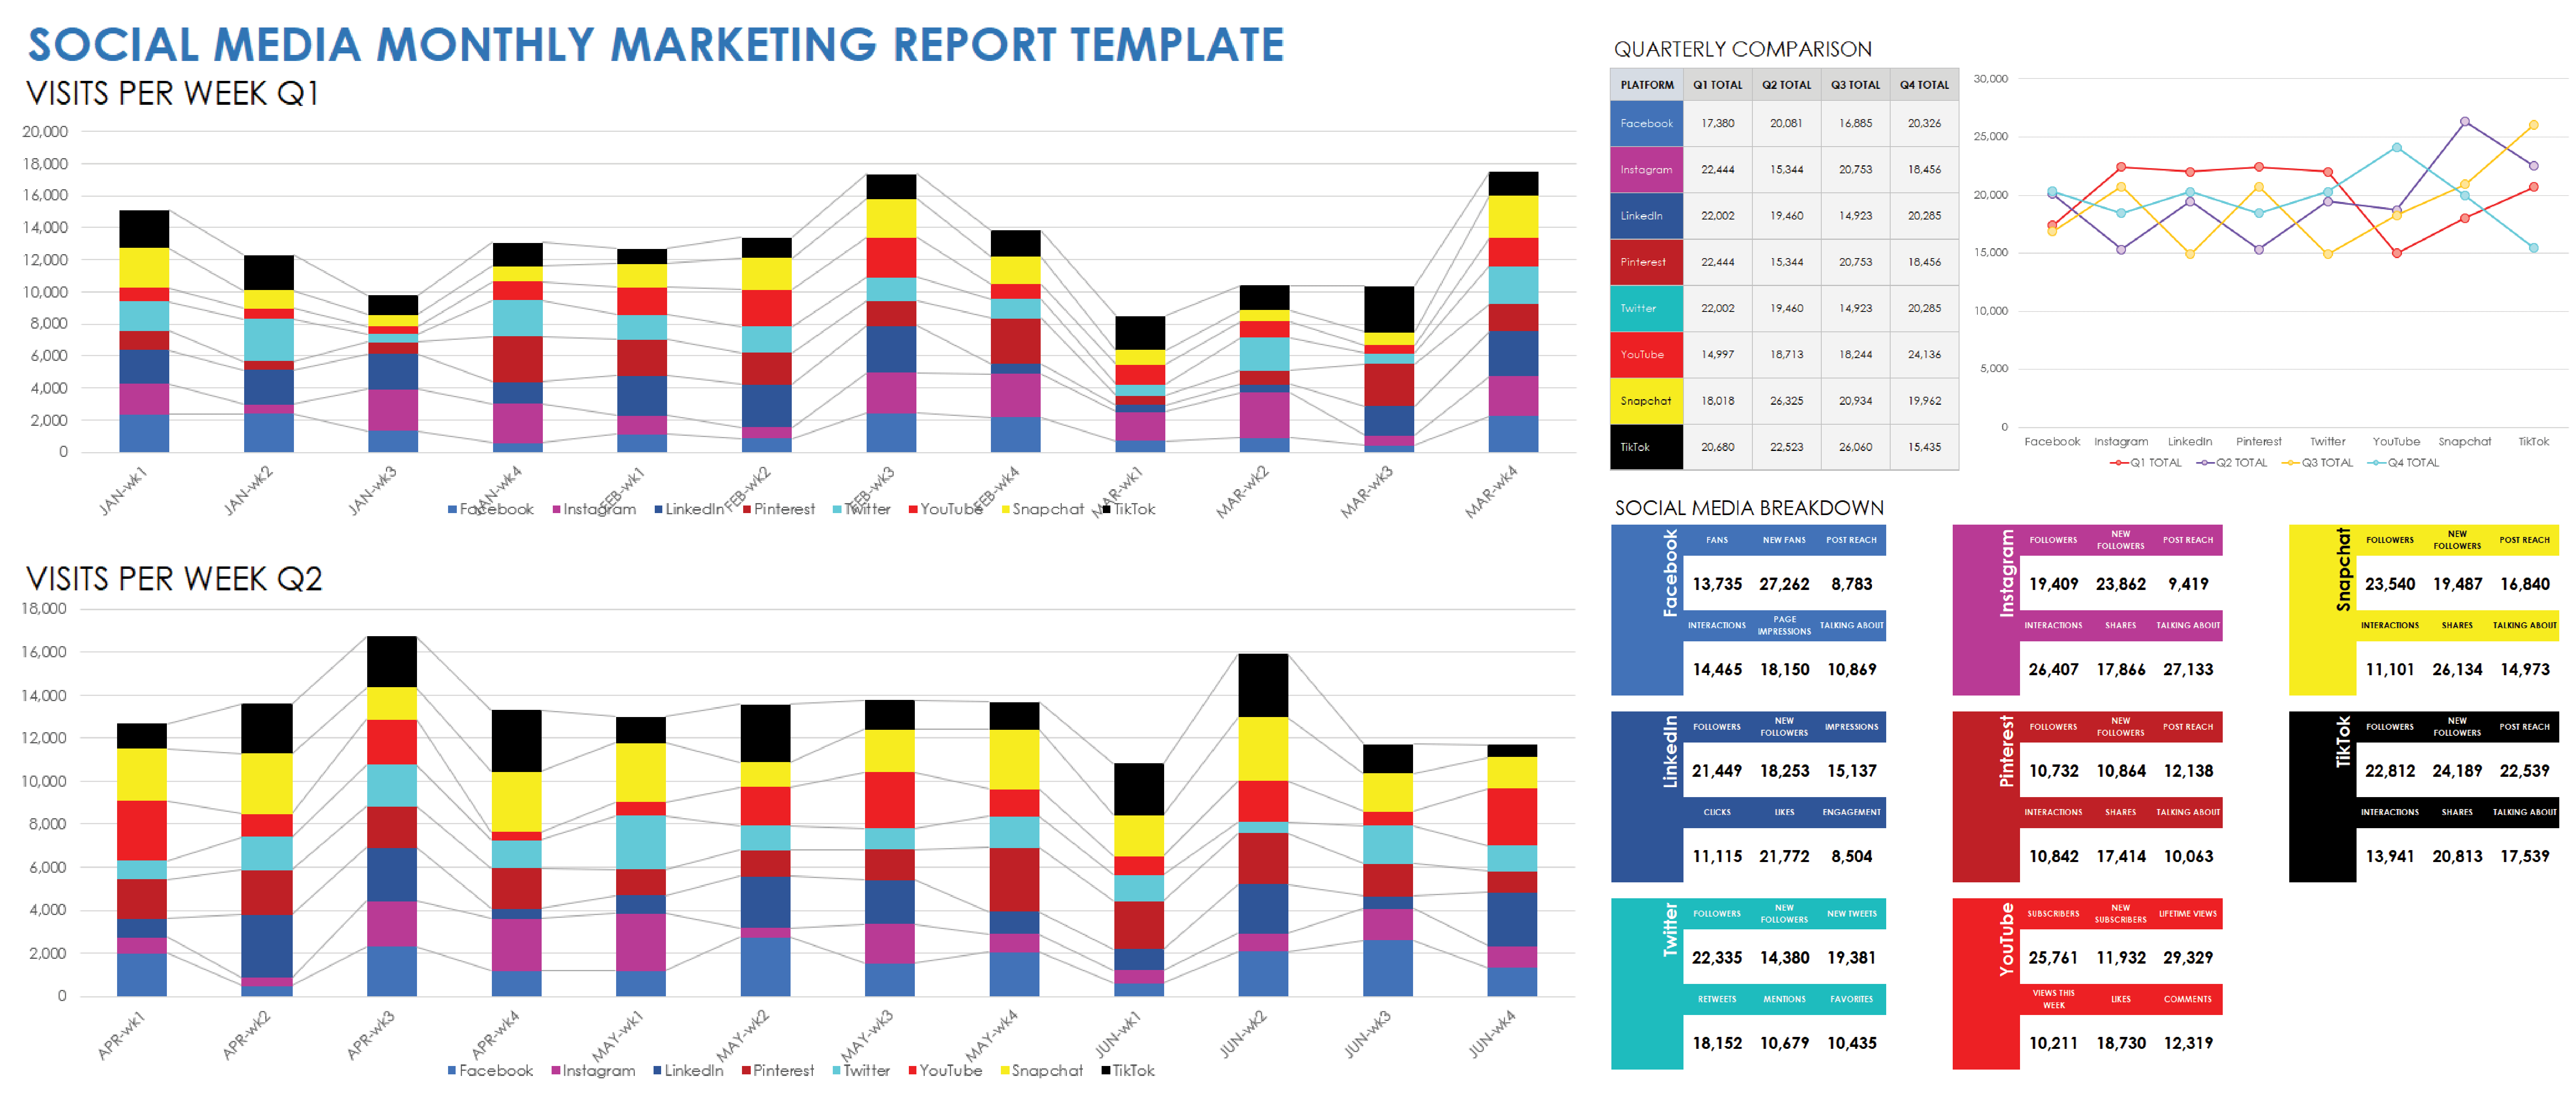 Social Media Monthly Marketing Report Template